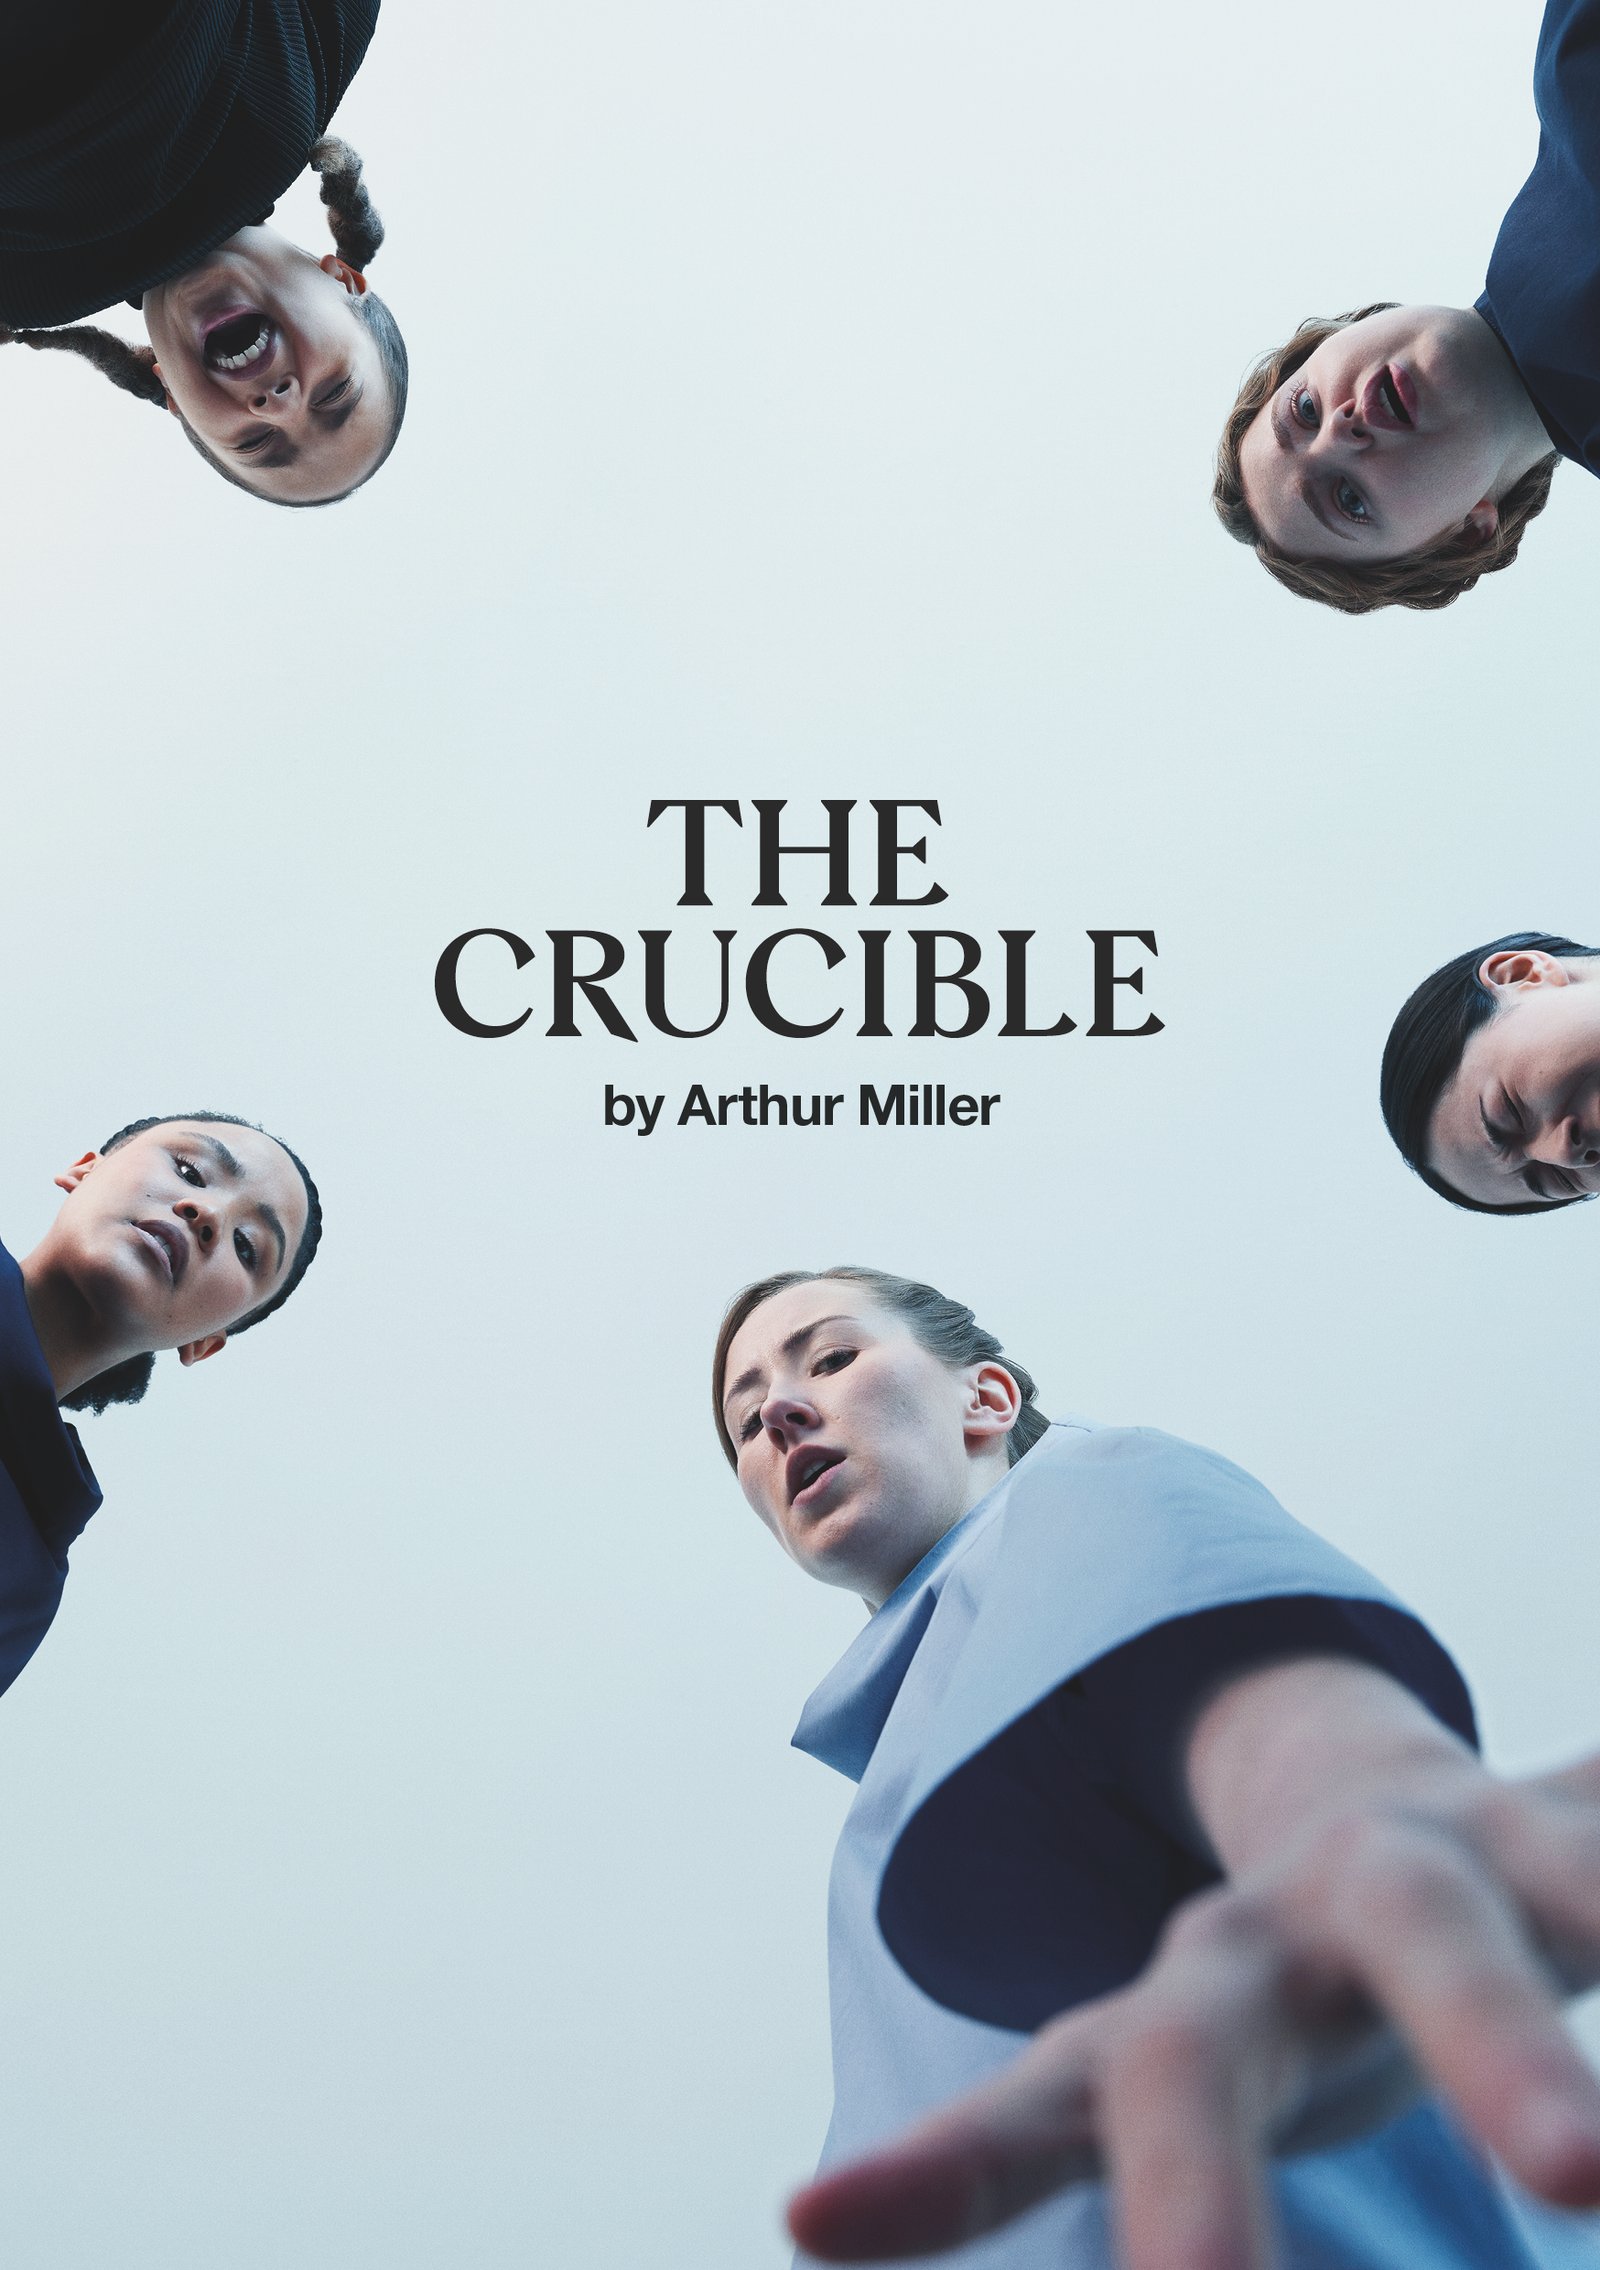 You are currently viewing NEWS: The Crucible at the Olivier directed by Lindsey Turner from 14th September 2022